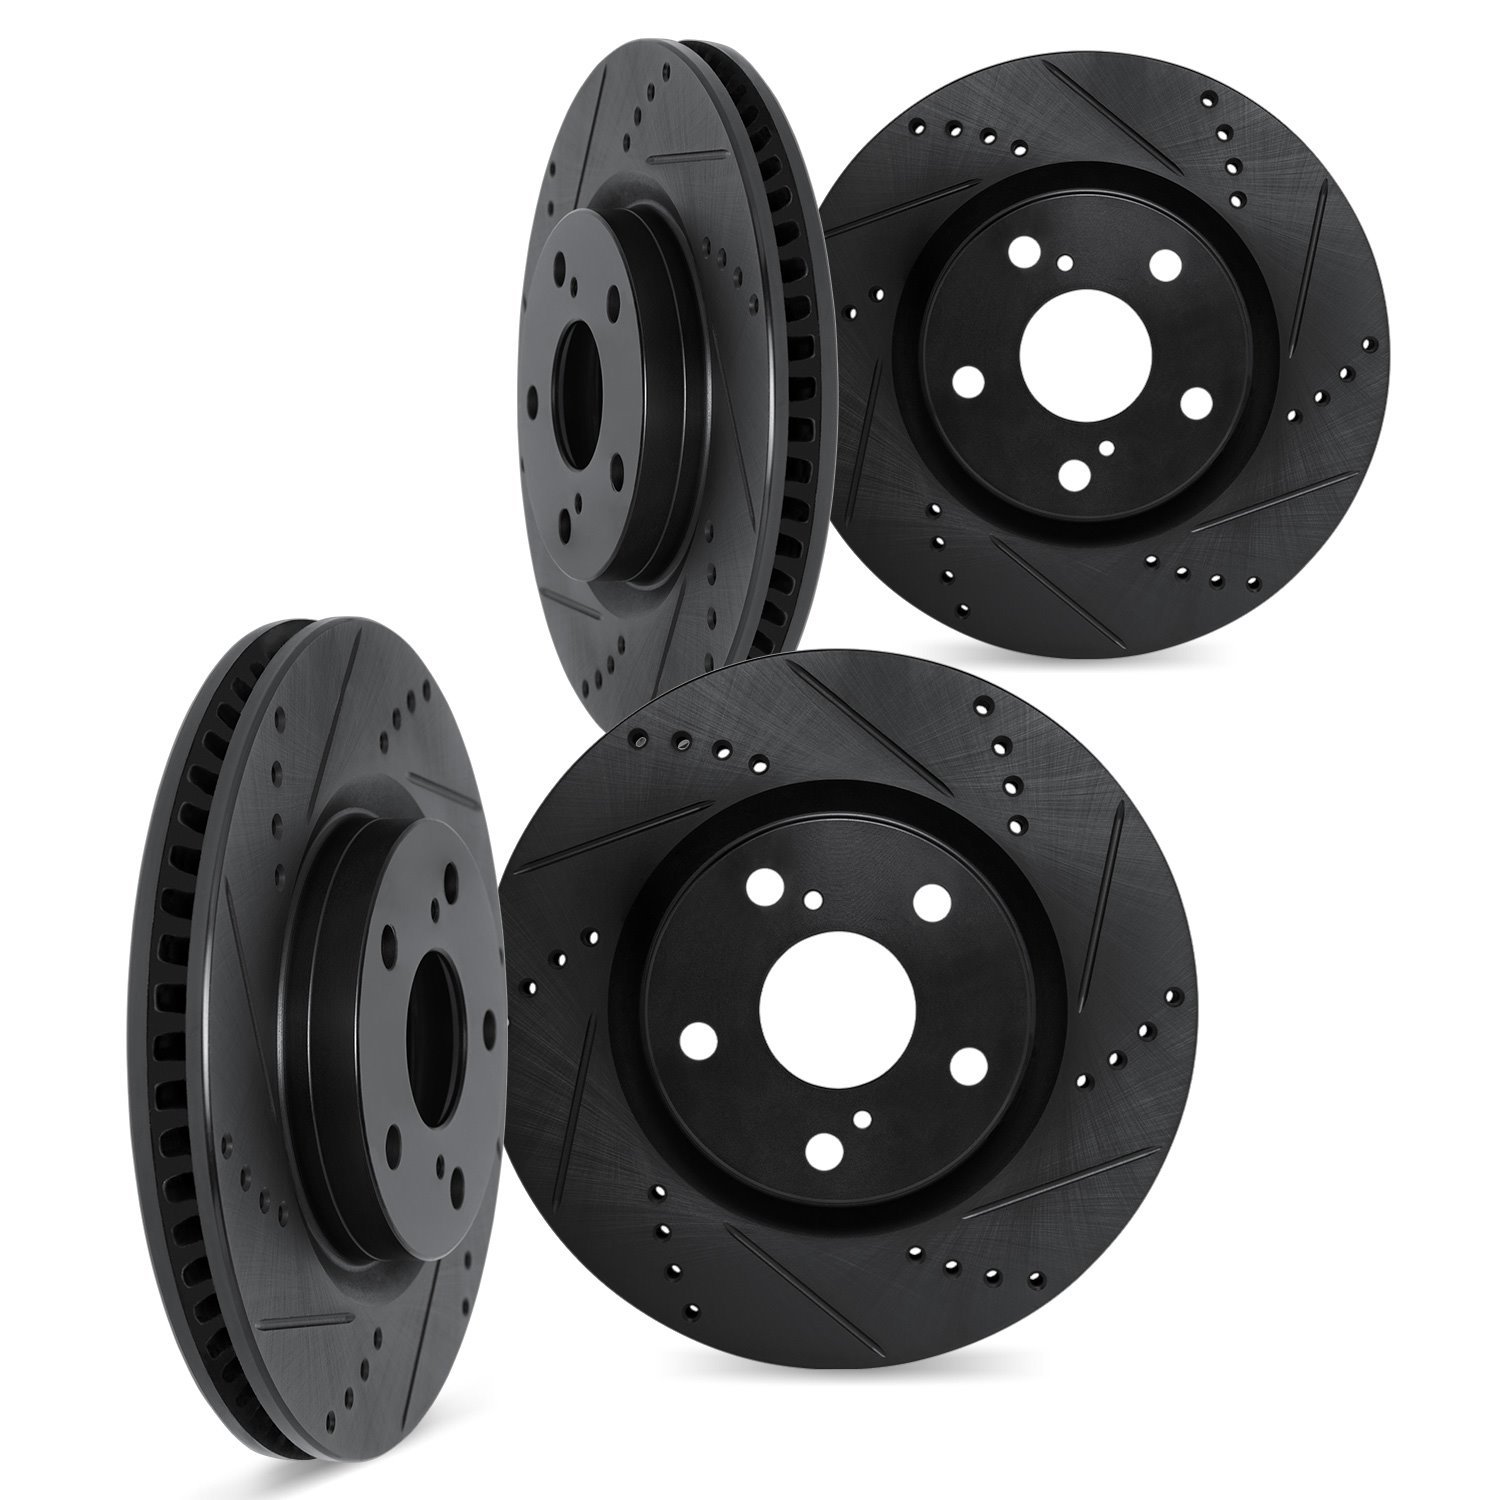 8004-46042 Drilled/Slotted Brake Rotors [Black], Fits Select GM, Position: Front and Rear